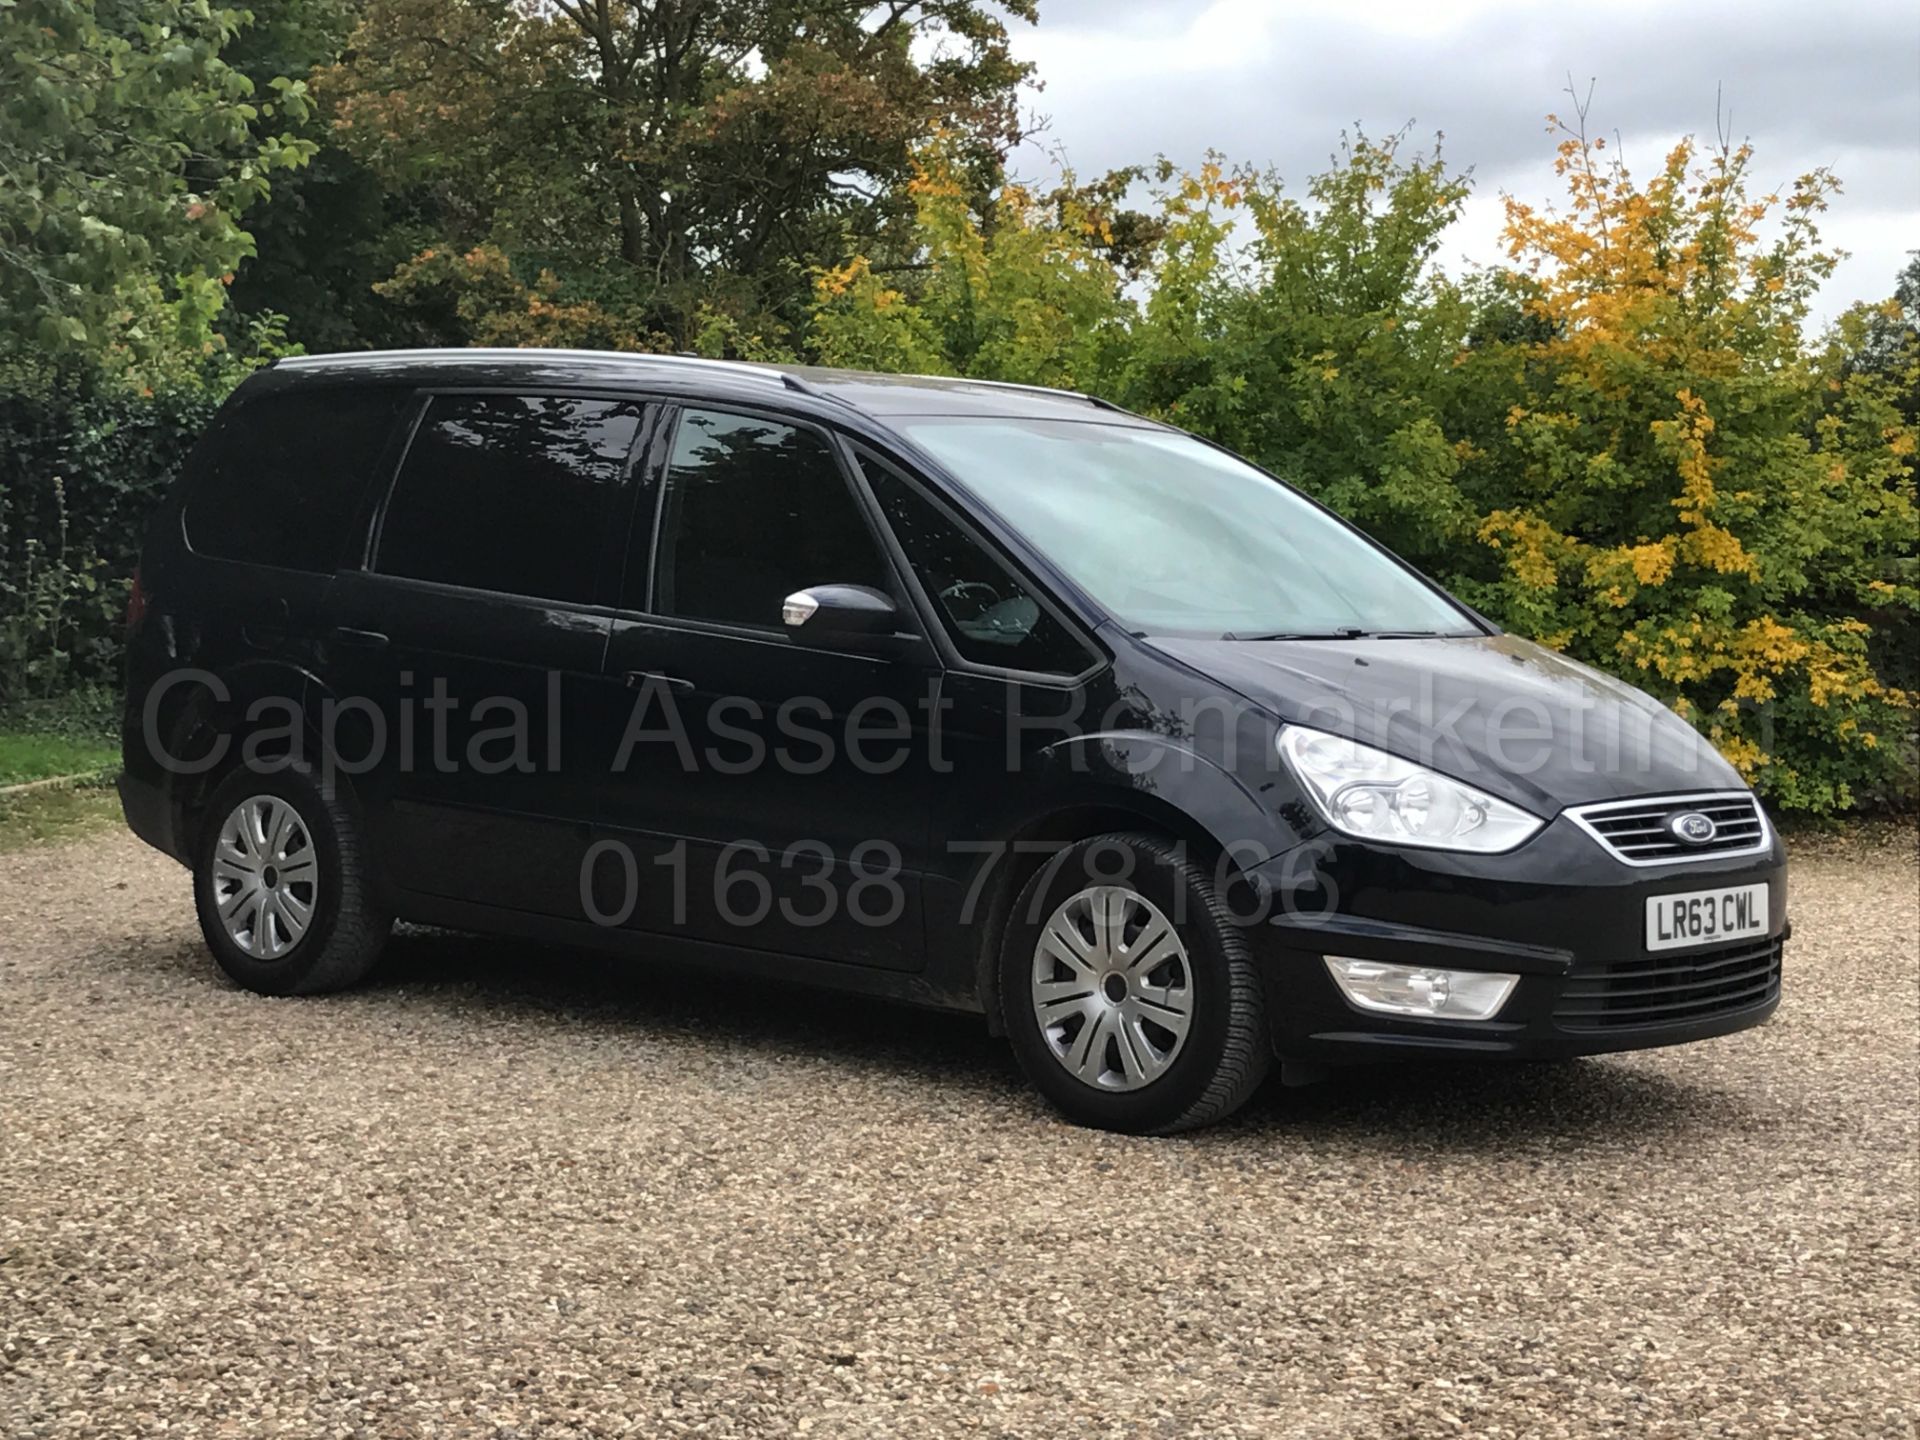 FORD GALAXY 'ZETEC' 7 SEATER MPV (2014 MODEL) '2.0 TDCI - 140 BHP - POWER SHIFT' (1 OWNER FROM NEW)